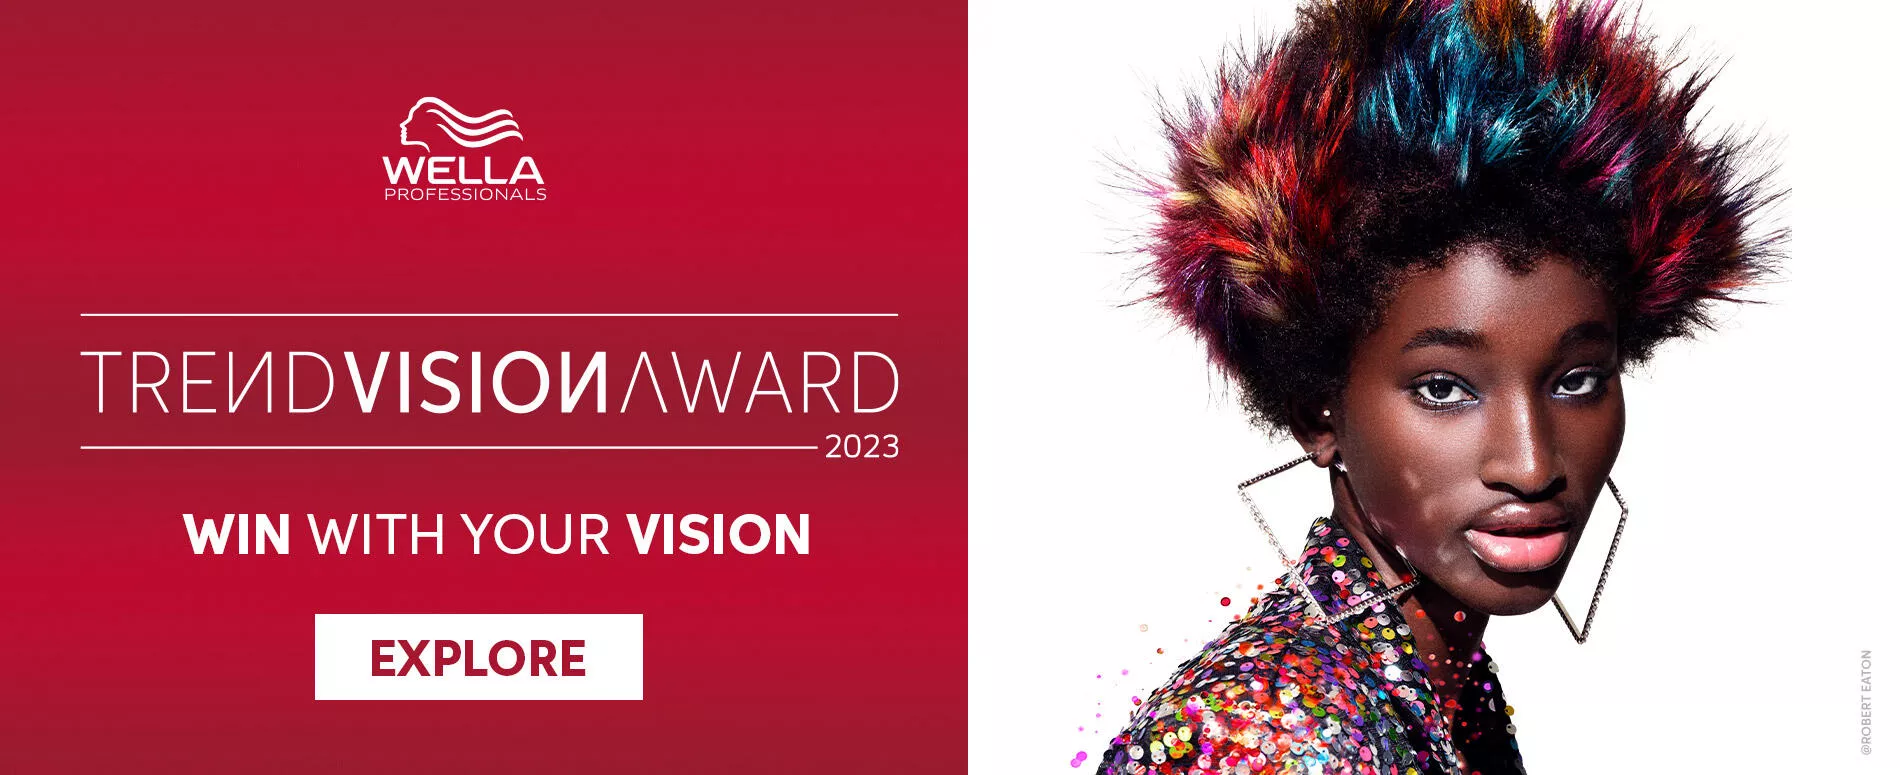 TrendVision Award 2023 Hairdressing Competition UK